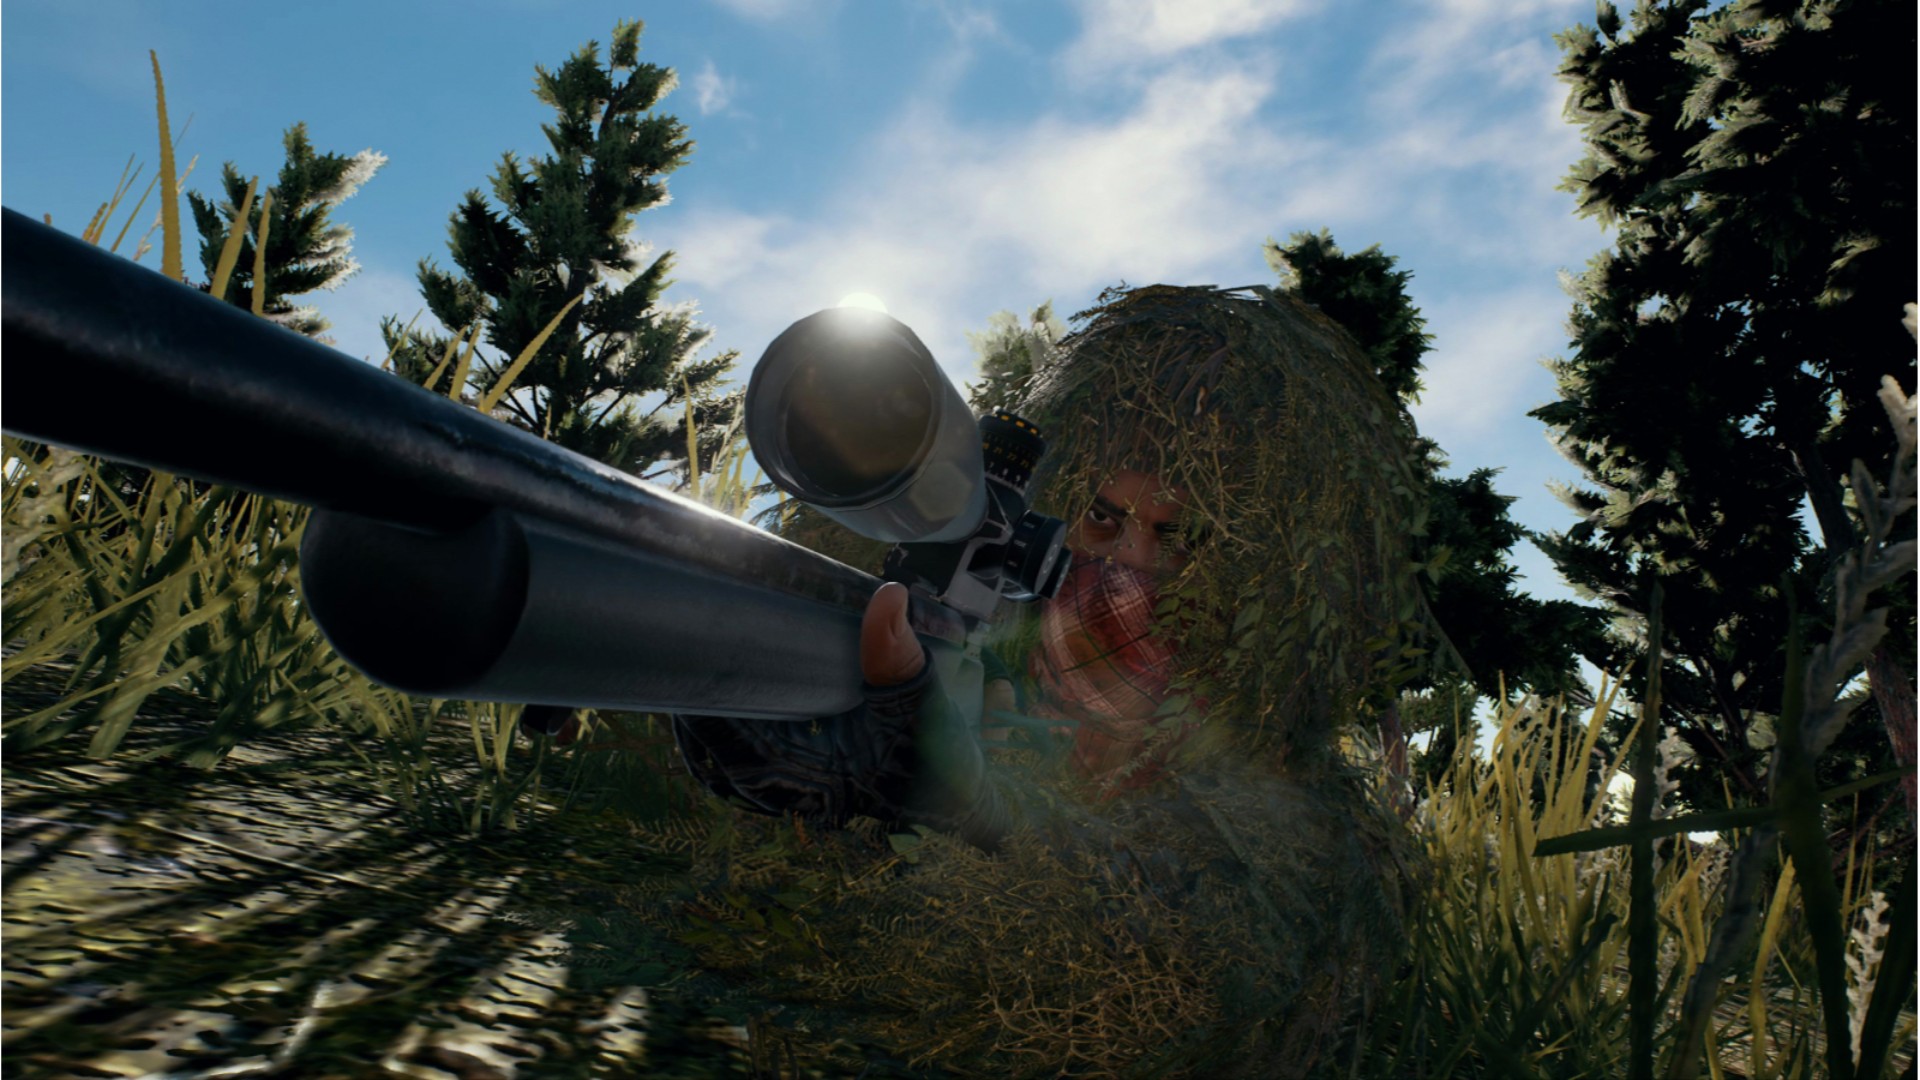 PlayerUnknown's Battlegrounds review (early access)